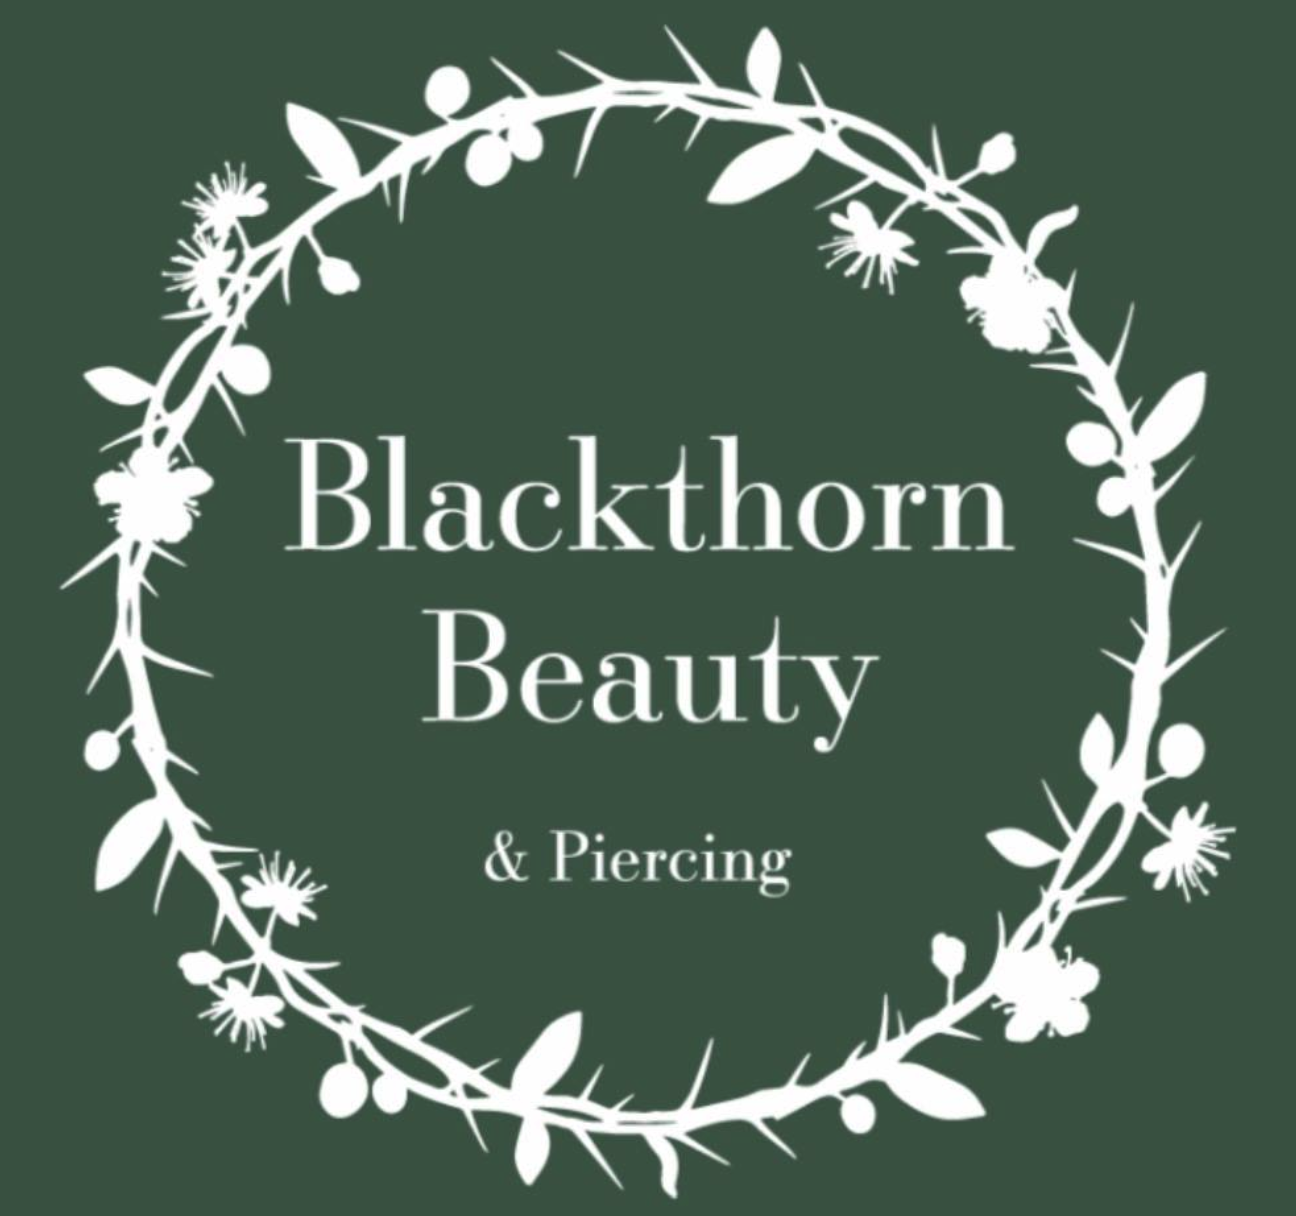 Blackthorn Beauty picture